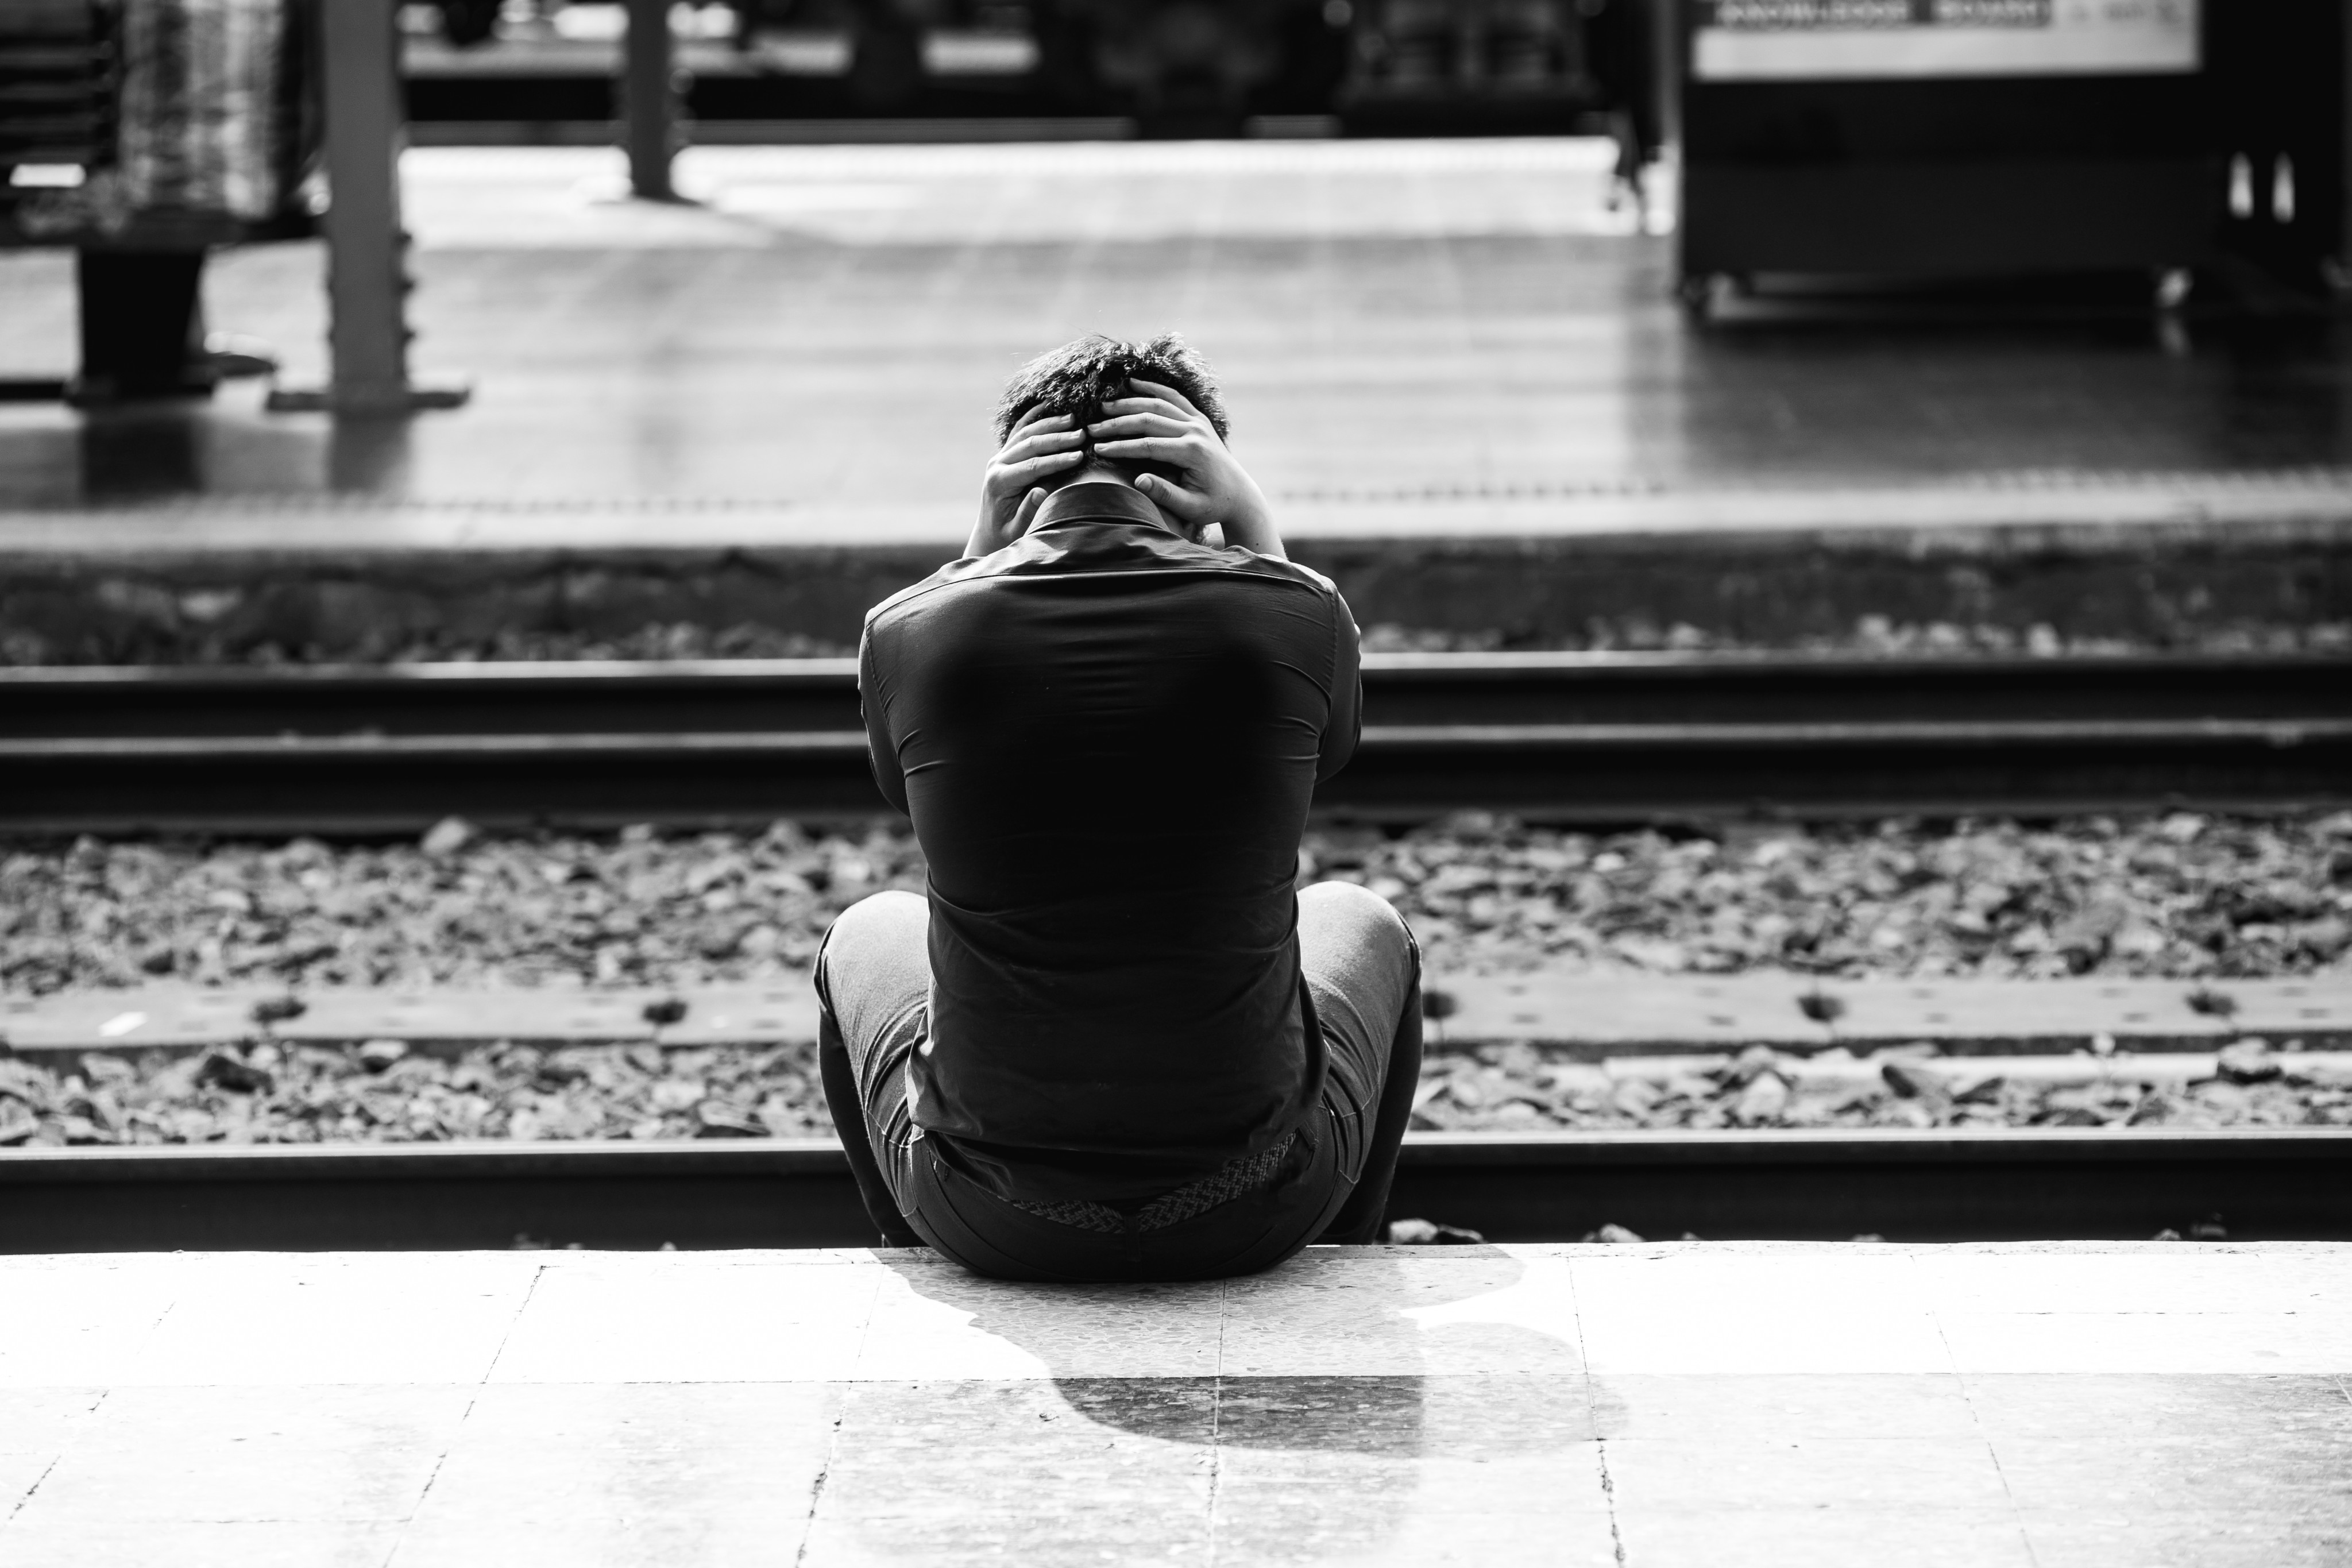 Depressed young man holding his head in hand at train station. Around 458,000 people were killed intentionally, higher than the 400,000 to 450,000 recorded every year since researchers started collating the data in 2000, according to the UN report. Photo: Shutterstock